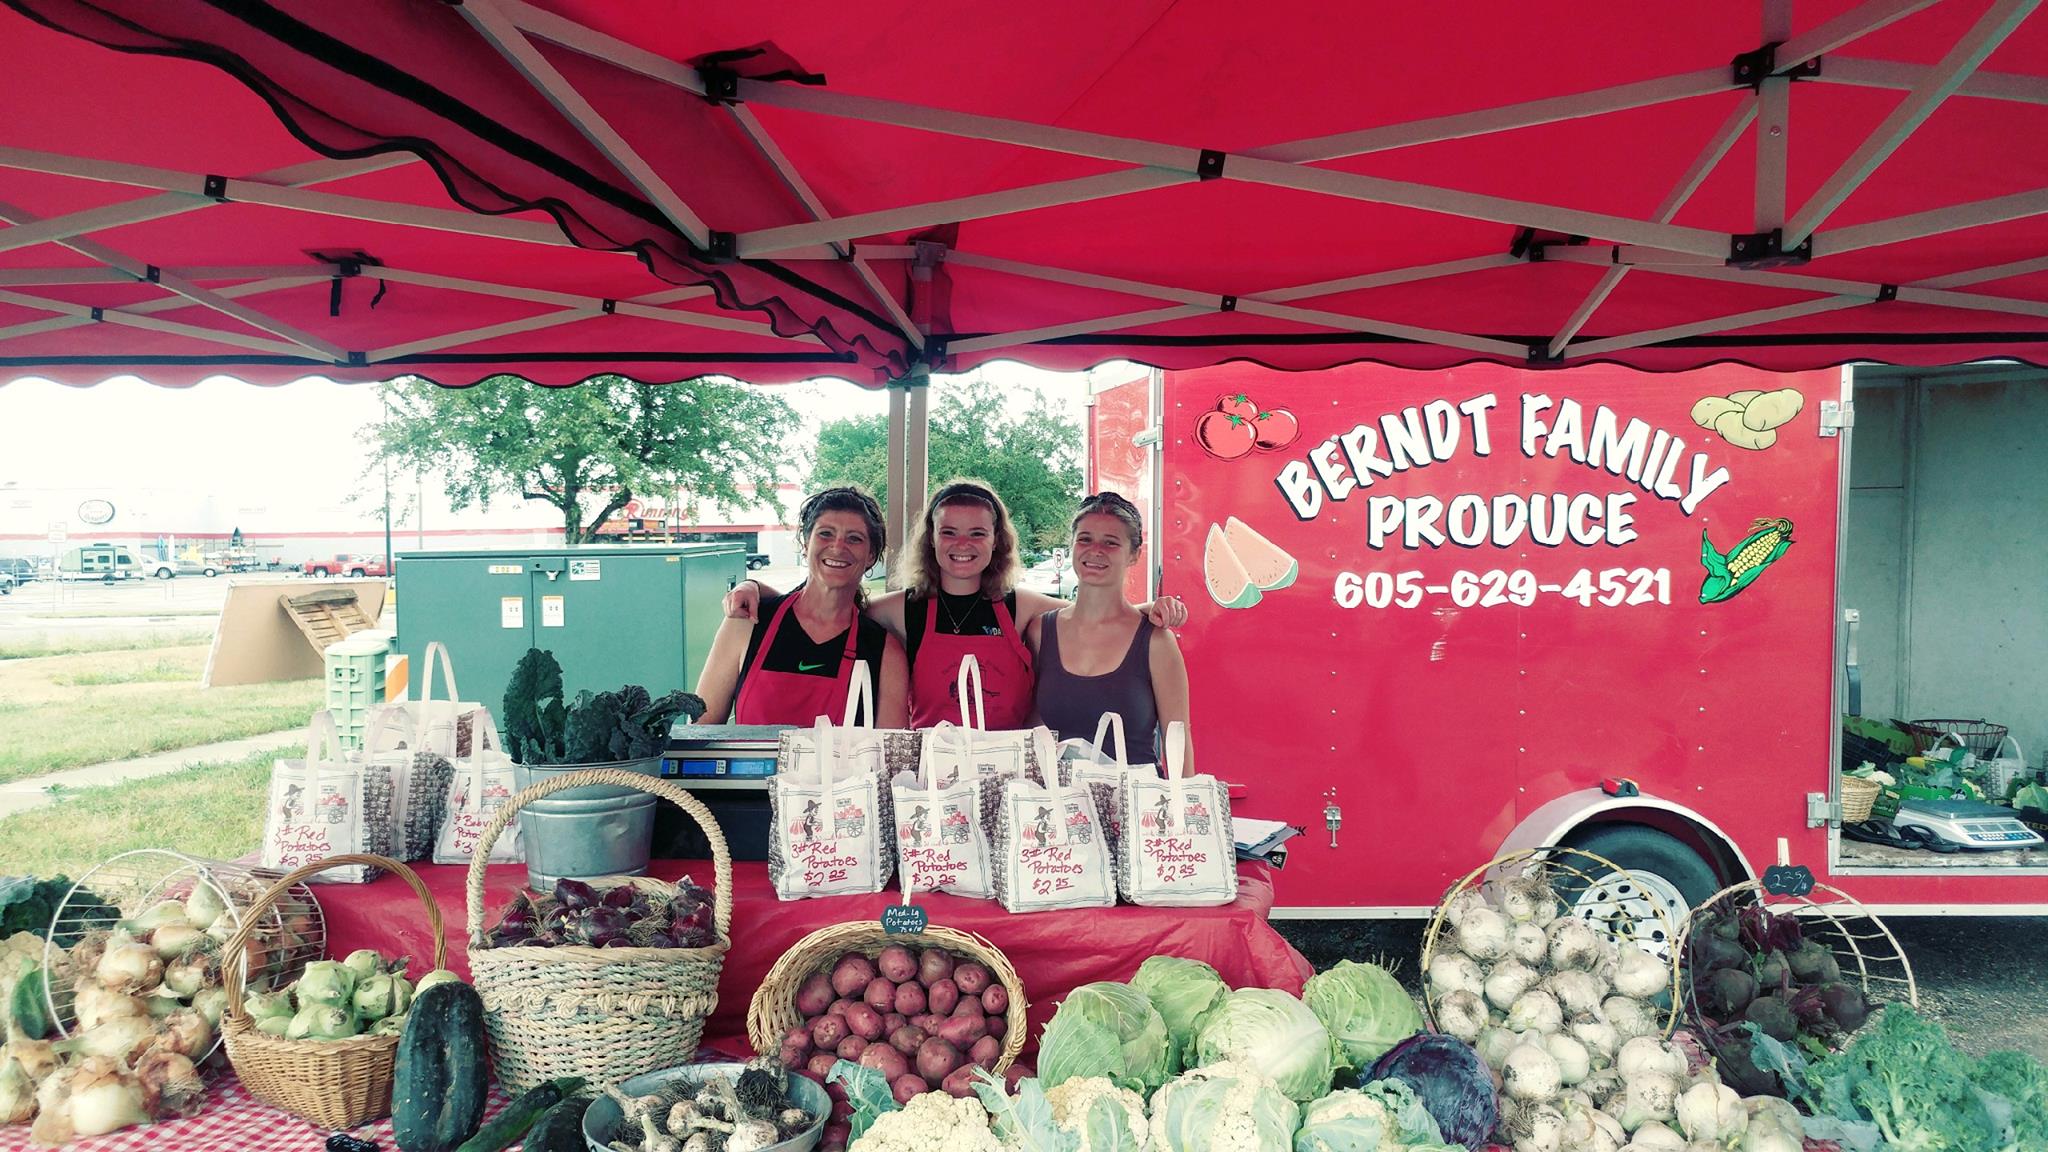 Faith and Family at the Center of Growing Veggies with Berndt Family Produce